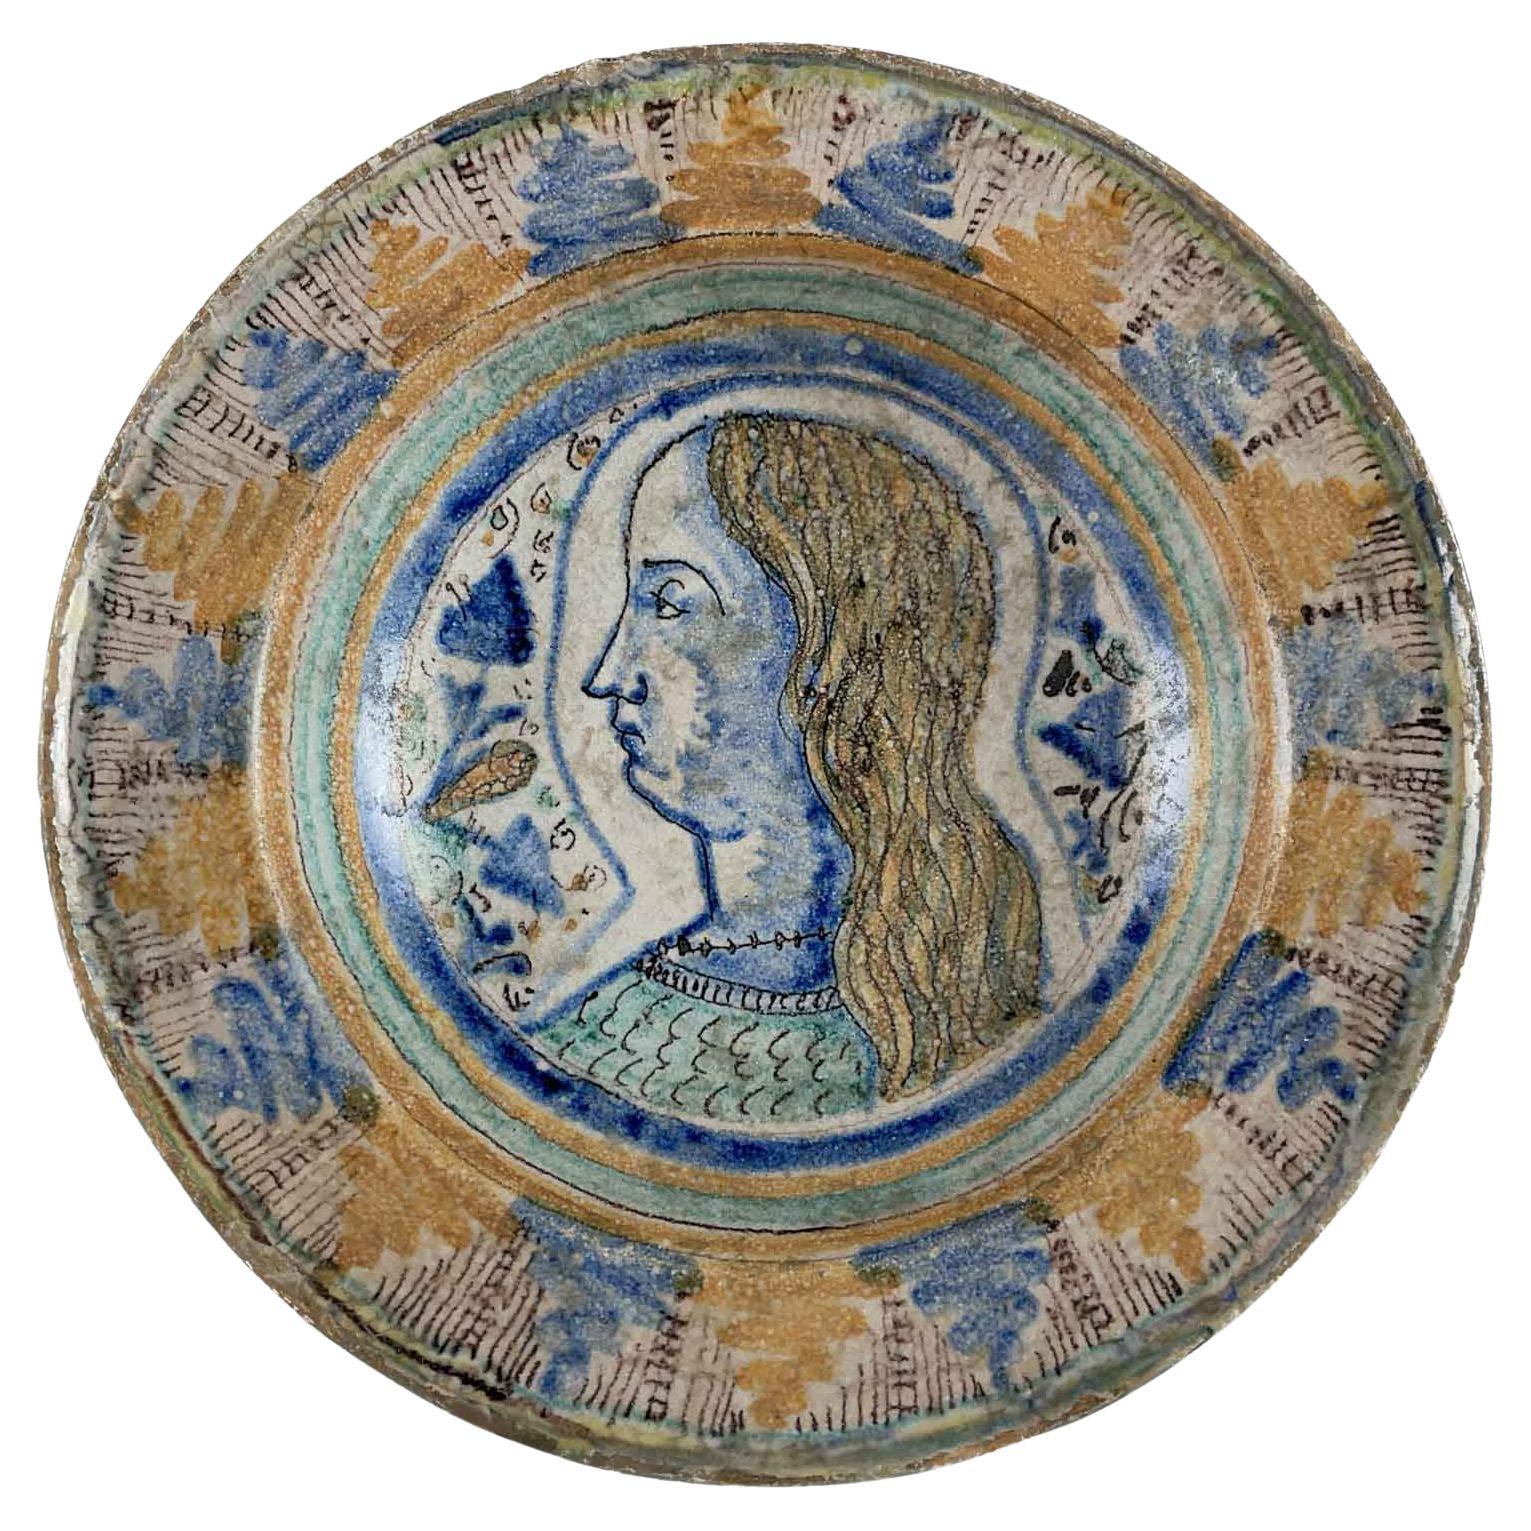 Mid-16th Century Italian Maiolica Dish hand-painted in blue and ocher yellow color with a profile young man portrait in the center. The maiolica color decoration of yellowish and blue are painted in a elegant alternating geometric motifs on the edge